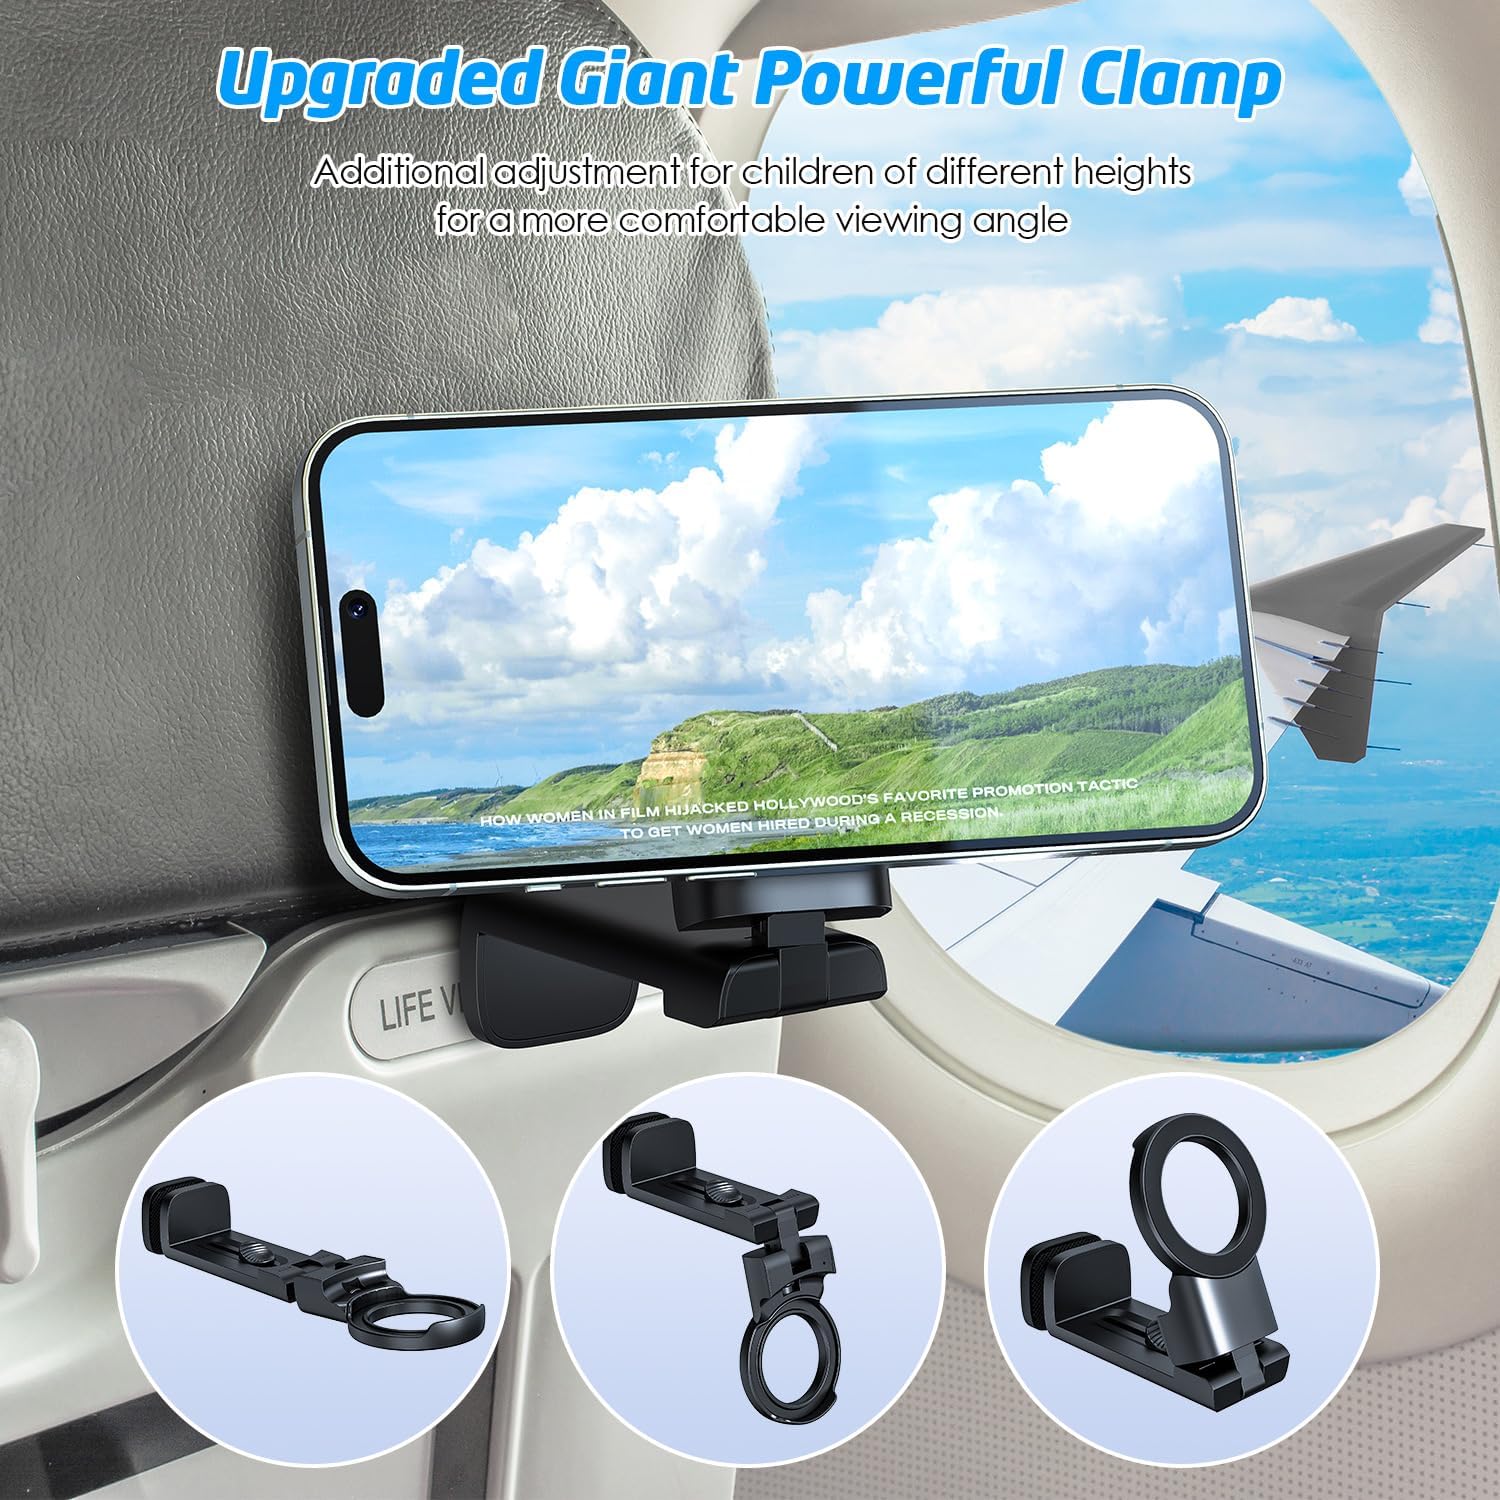 WixGear Universal Airplane in Flight Phone Mount, for MagSafe Phones, Handsfree Phone Holder for Desk with Multi-Directional Dual 360 Degree Rotation Essential for Flying (Compatible MagSafe iPhones)